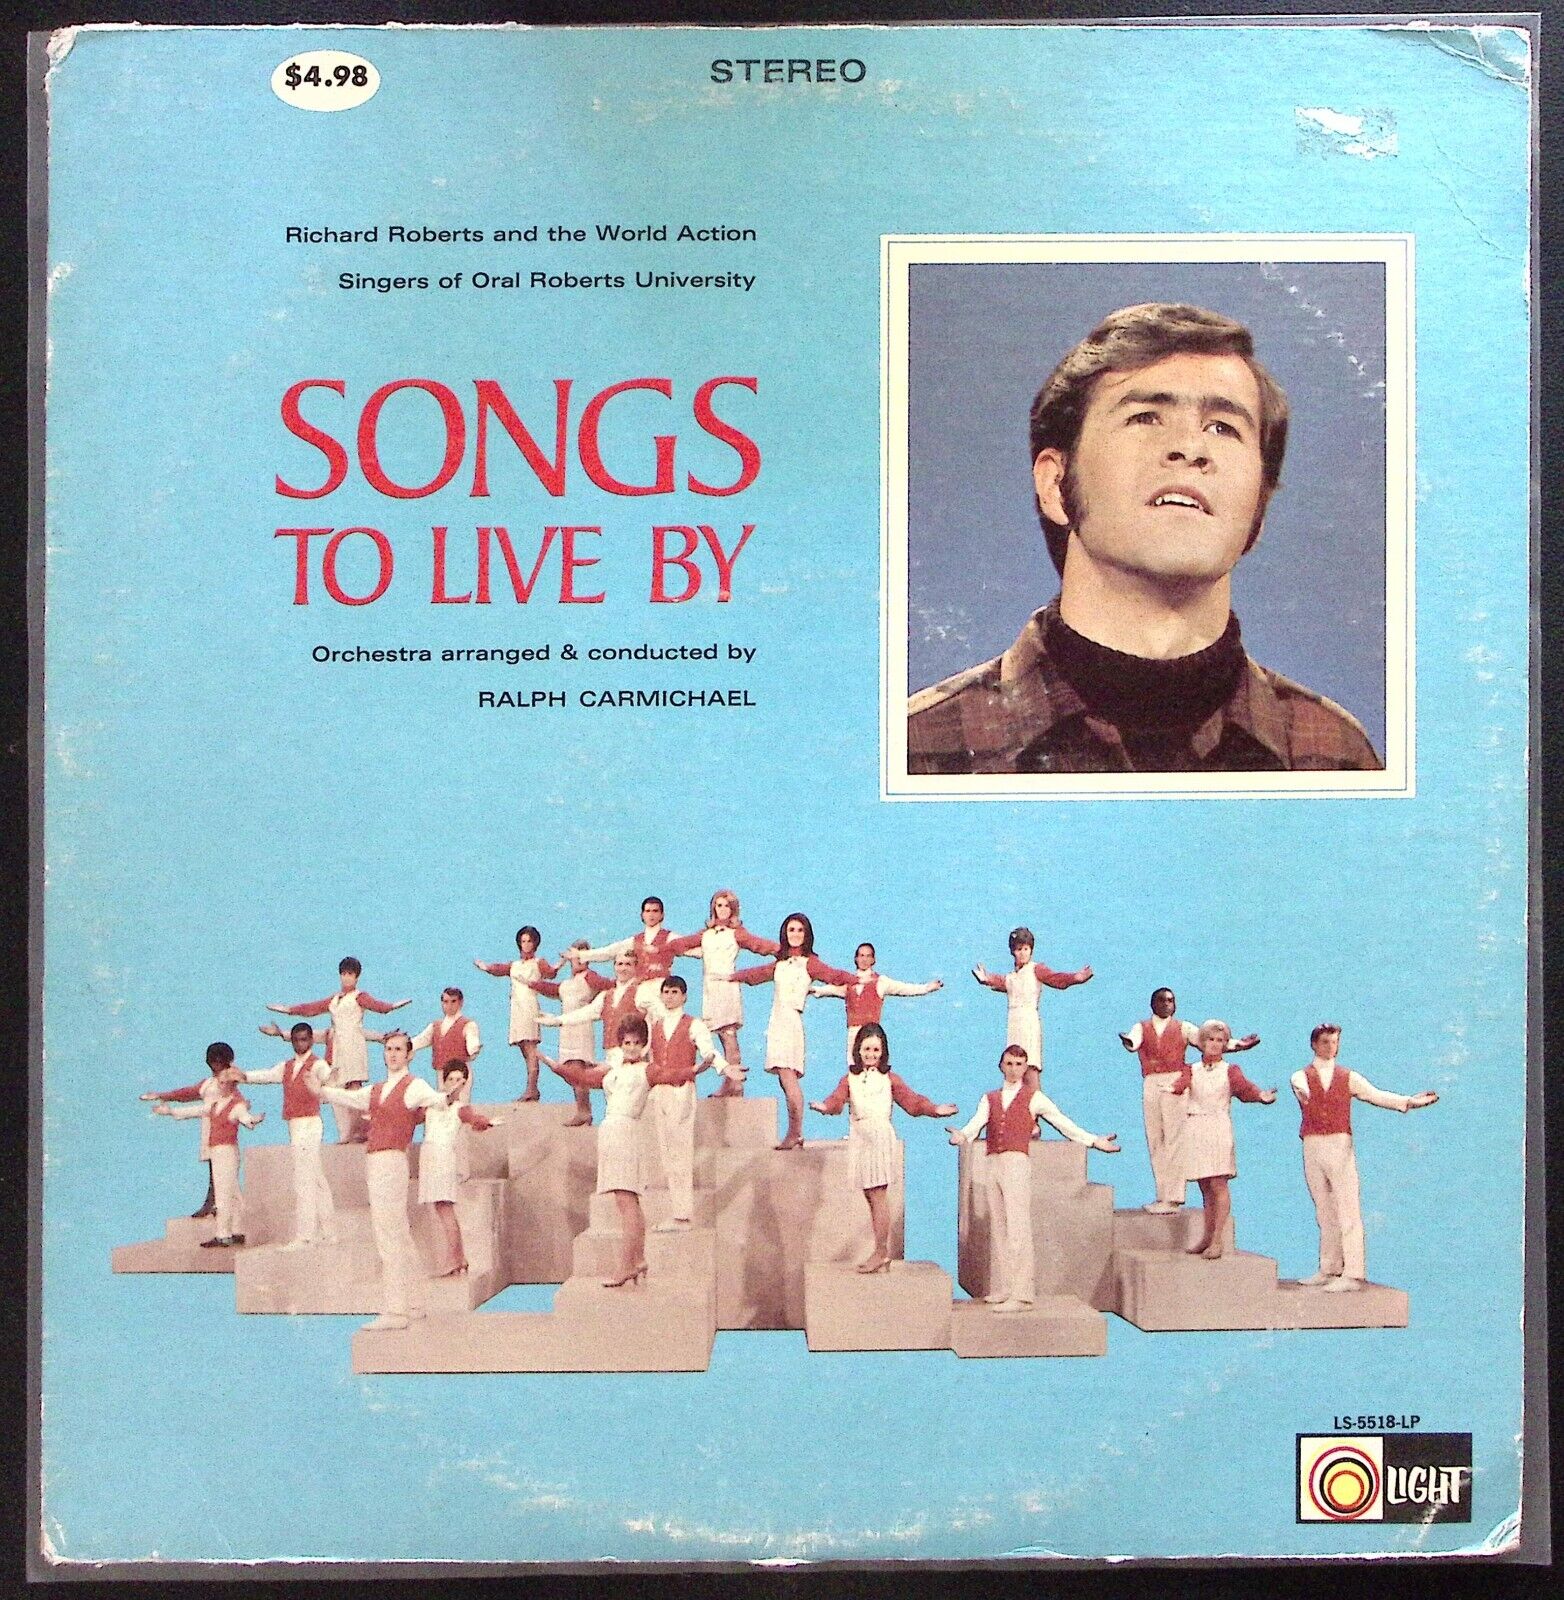 RICHARD ROBERTS ORAL ROBERTS SONGS TO LIVE BY RALPH CARMICHAEL VINYL LP 184-75